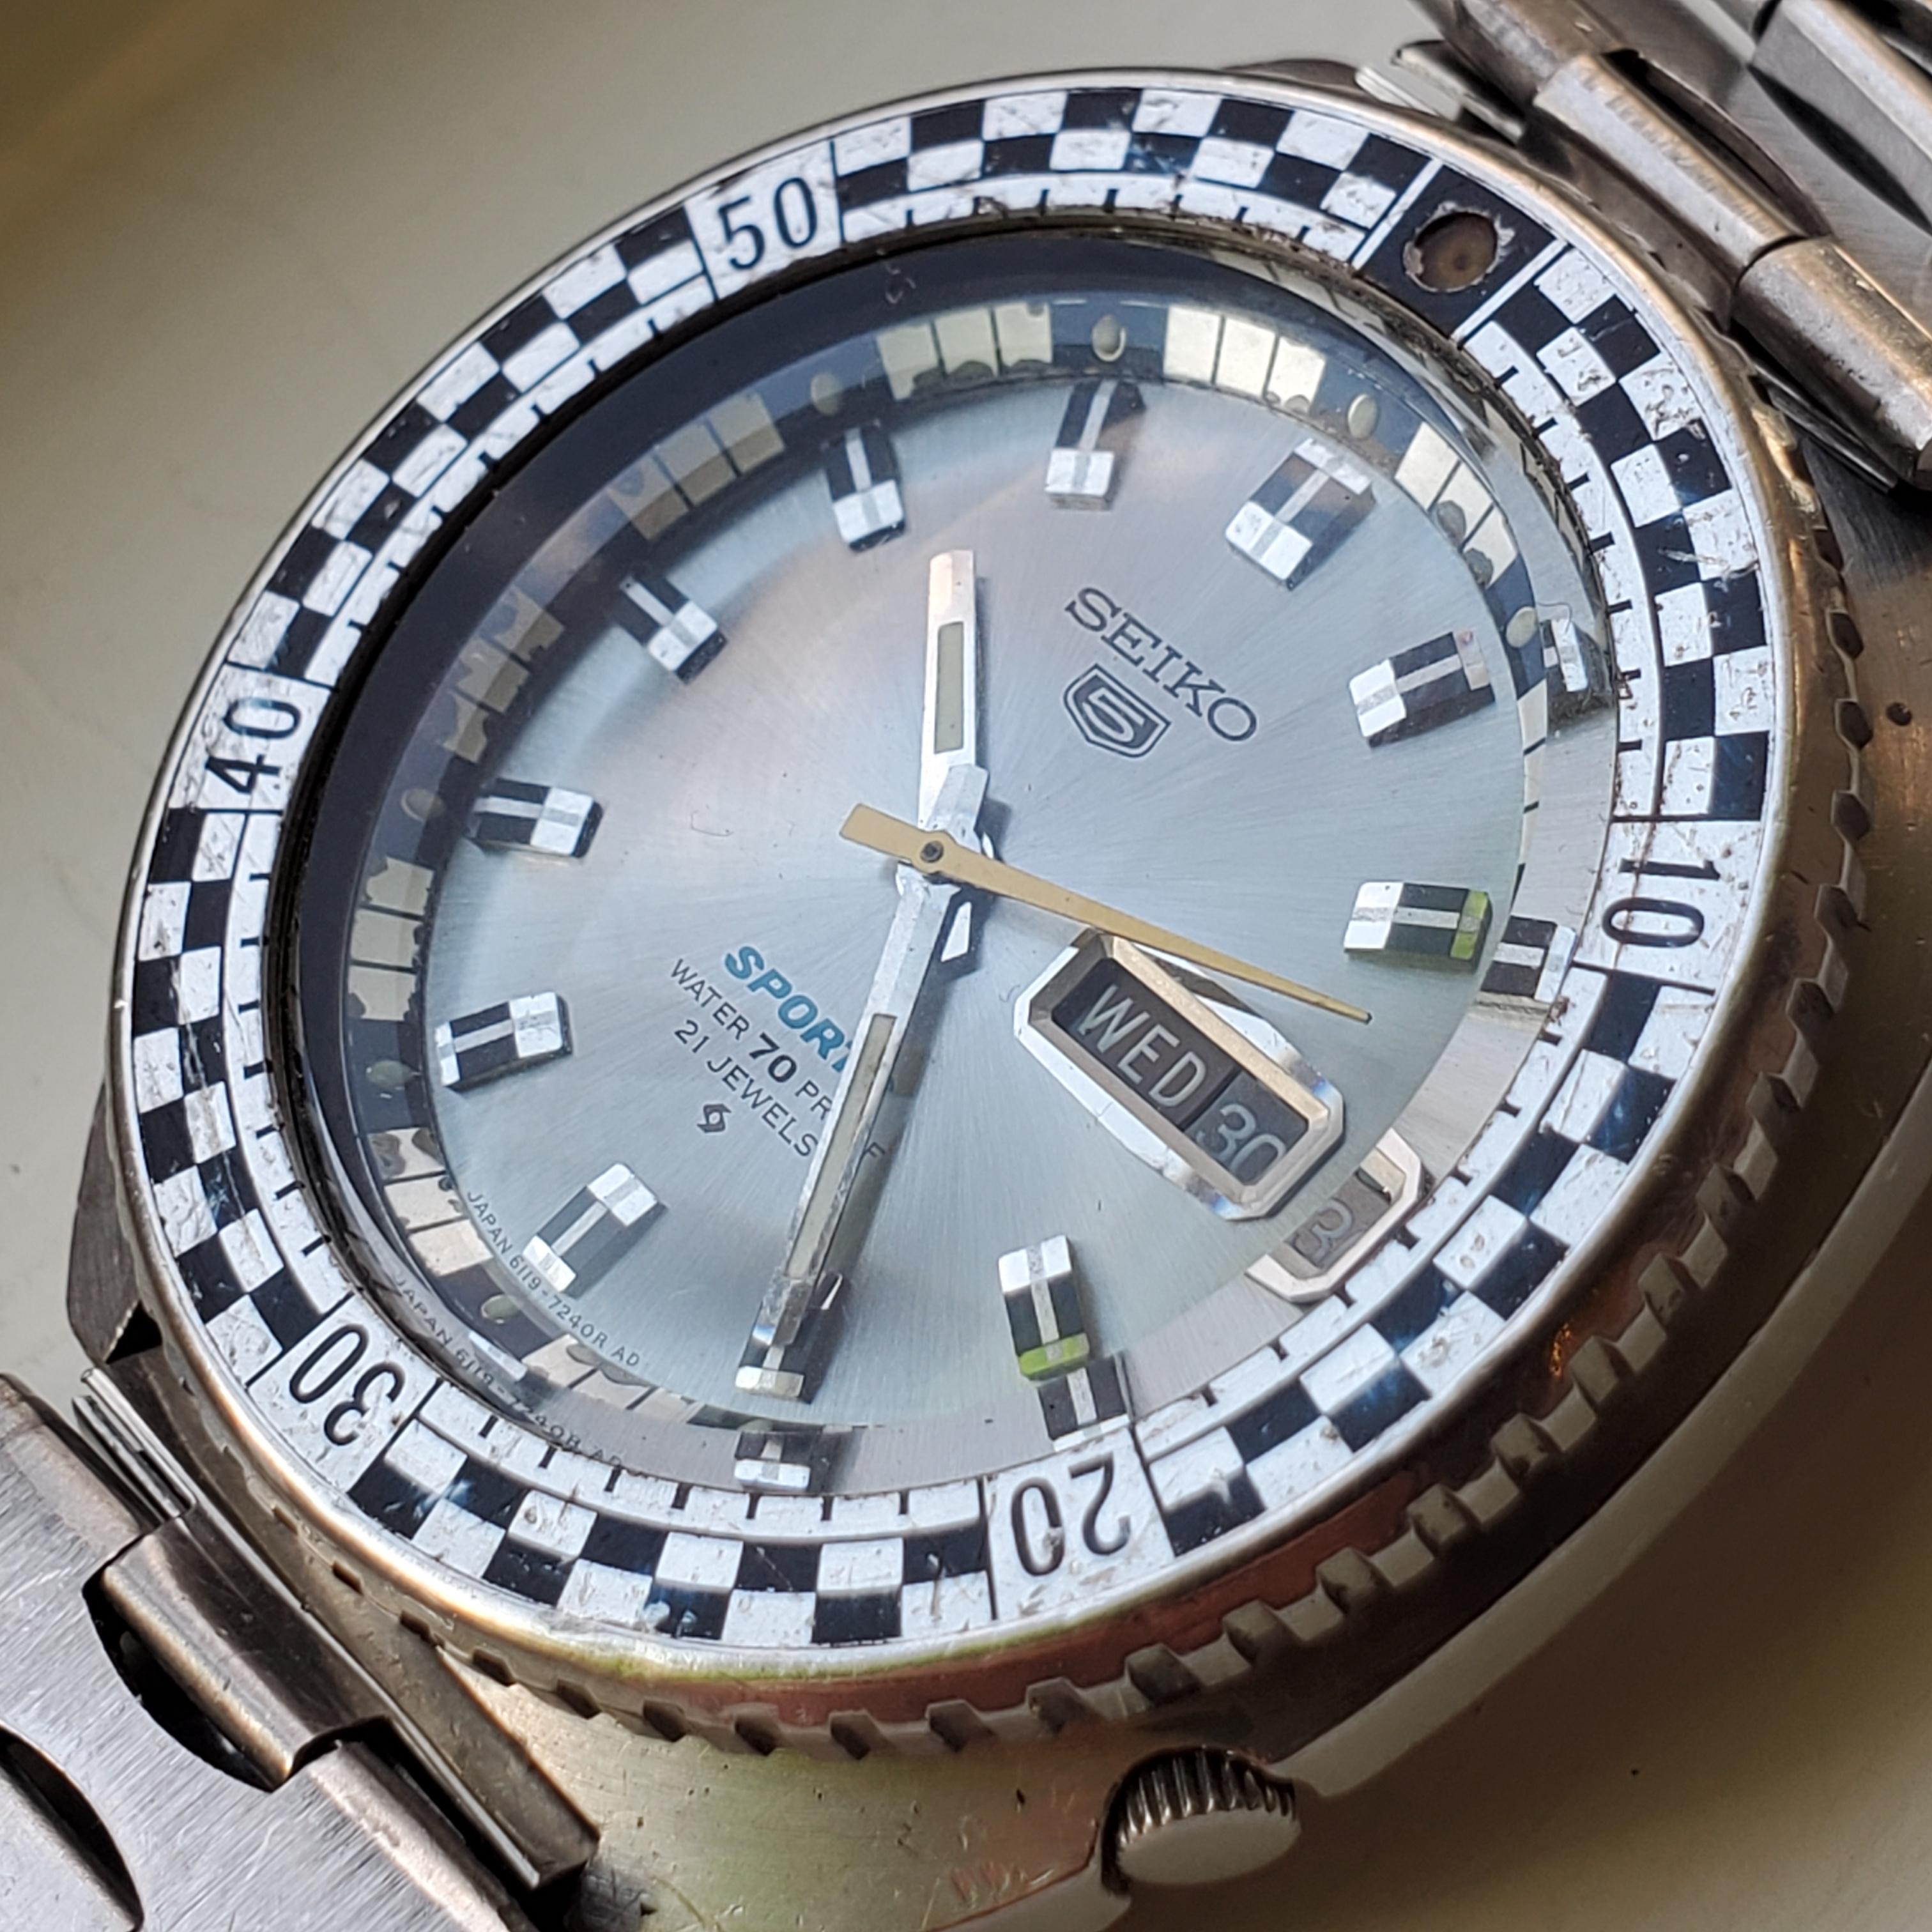 [WTS] Seiko Rally Diver 6119-7170 | WatchCharts